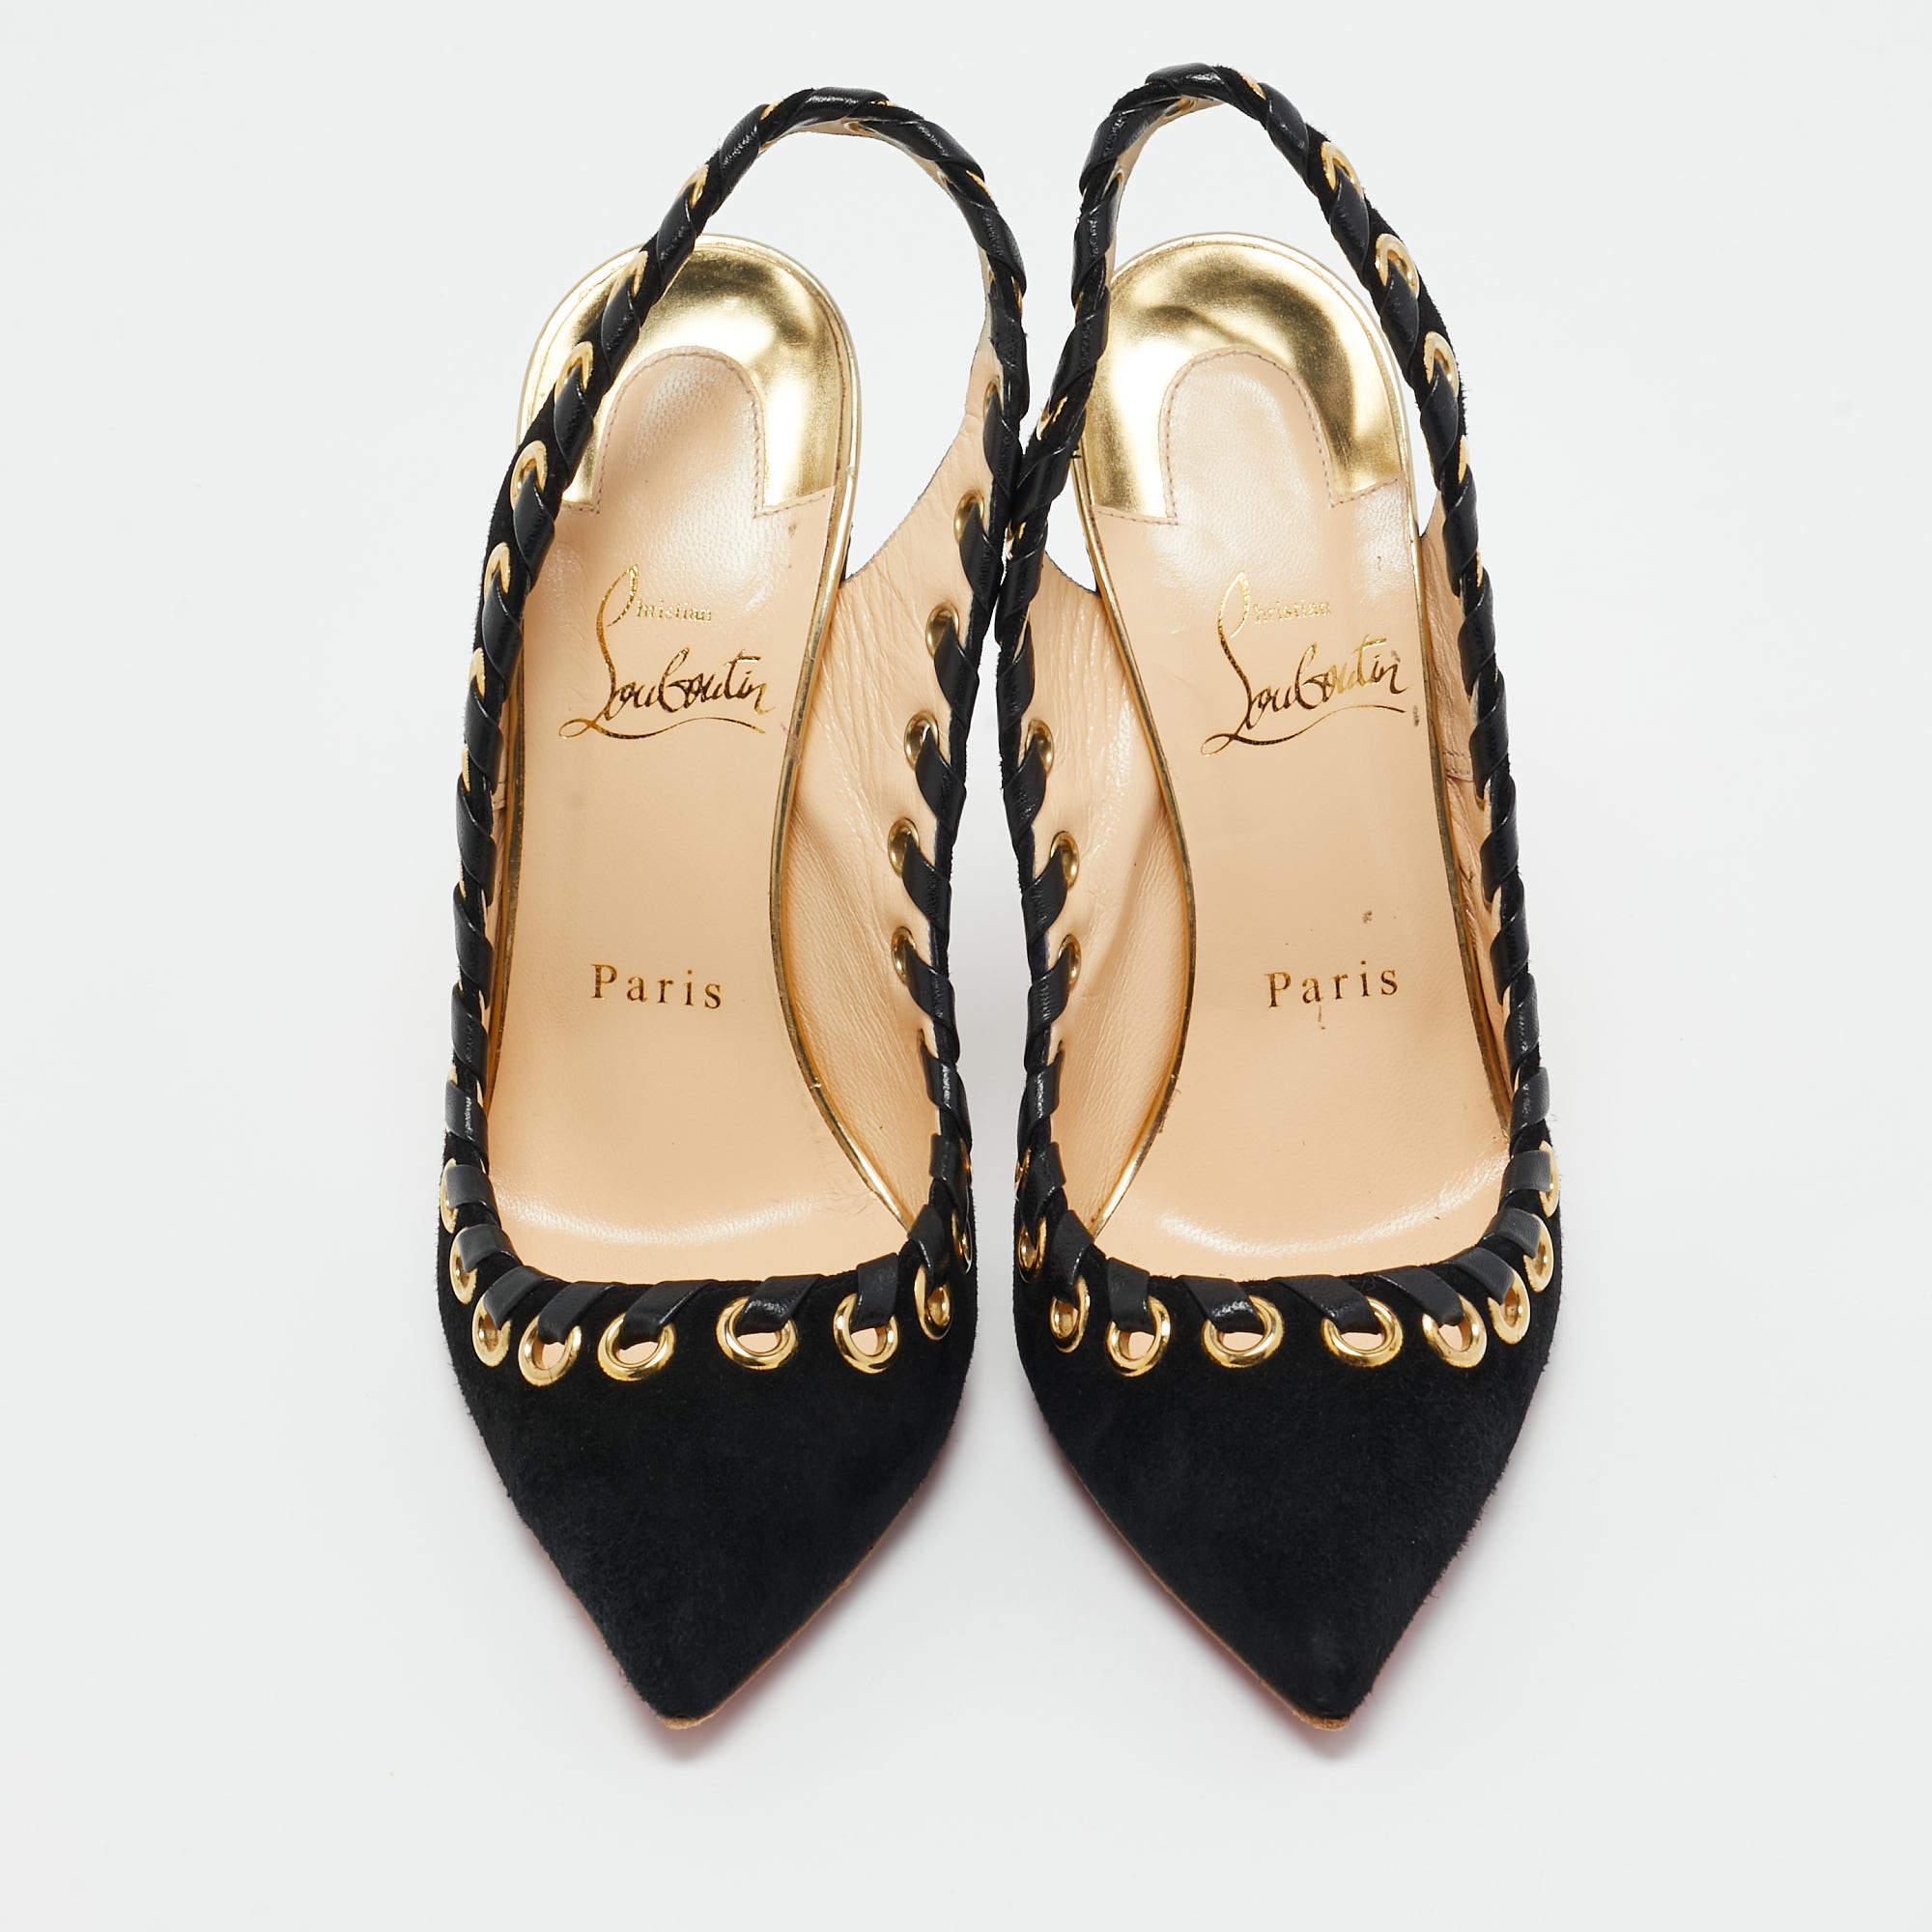 Christian Louboutin brings you this stunning pair of Whipstitch Ostri pumps that will elevate your outfit and give you confidence in every step. The chic suede sandals come with pointed toes and flaunt leather trims looped through gold-tone eyelets.